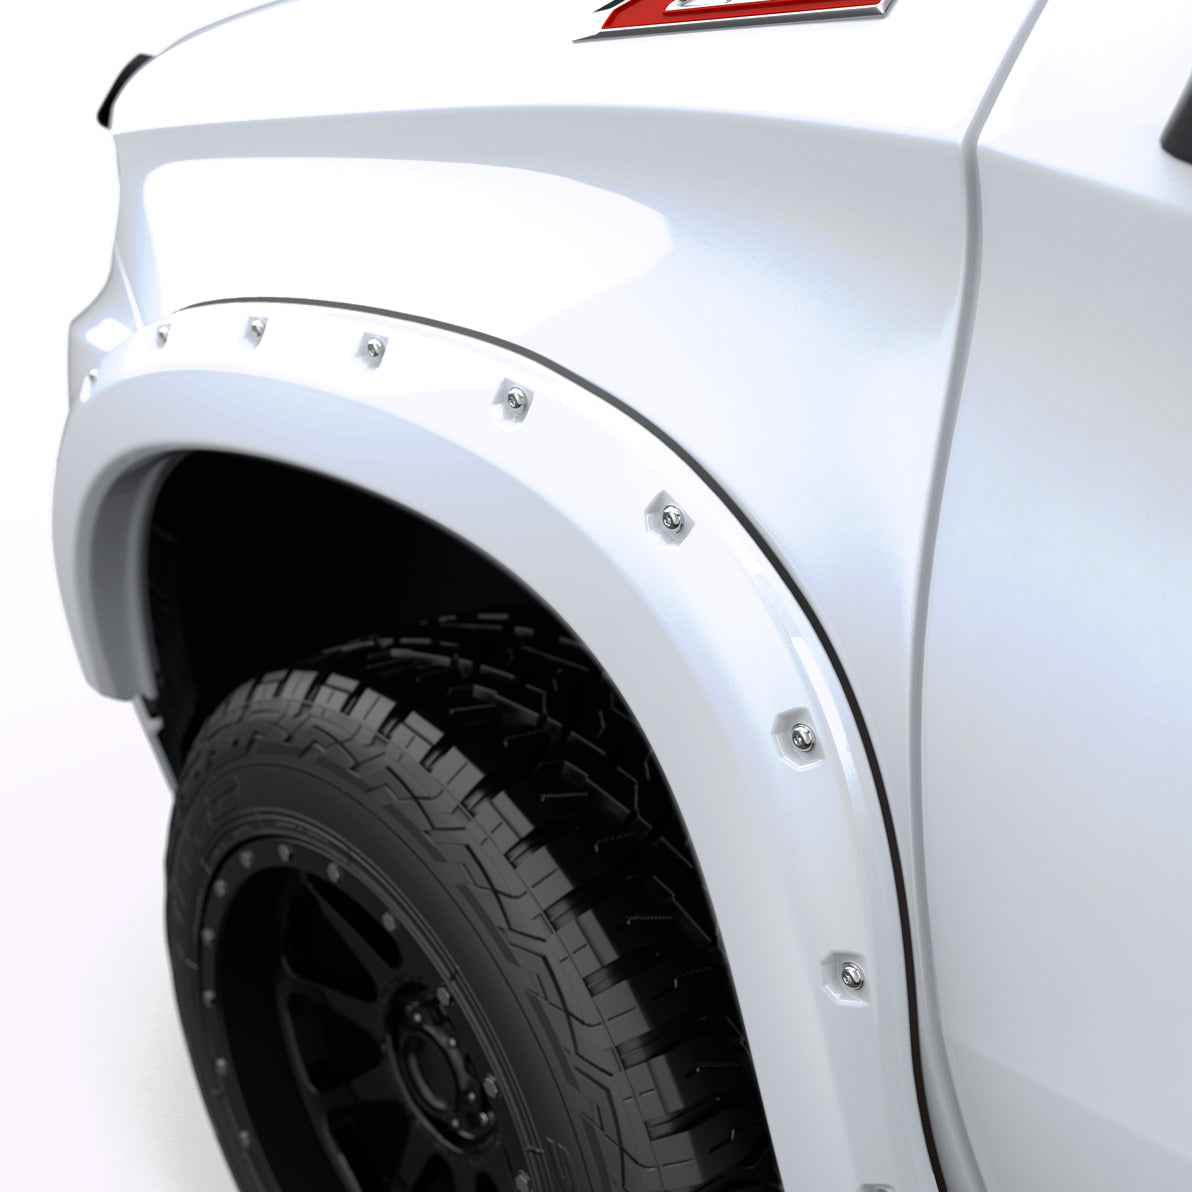 EGR 2023-2024 Chevrolet Silverado 1500 2 & 4 Door Crew Cab Standard Cab Extended Cab Pickup Traditional Bolt-on look Fender Flares set of 4 Painted to Code Summit White 791654-GAZ